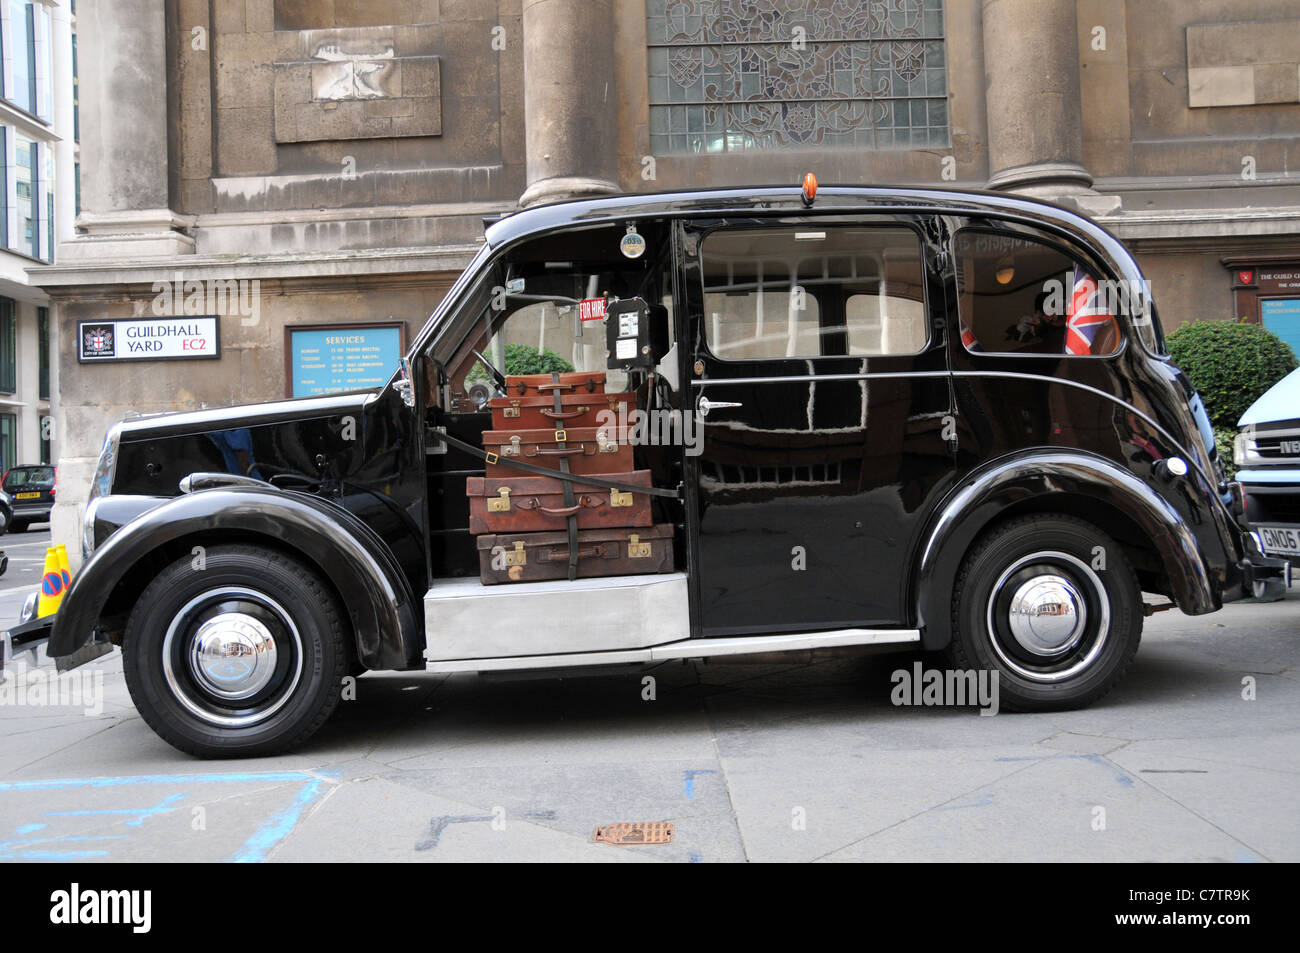 The Queen is Dead! - Page 3 Beardmore-london-taxi-cab-classic-car-luggage-C7TR9K